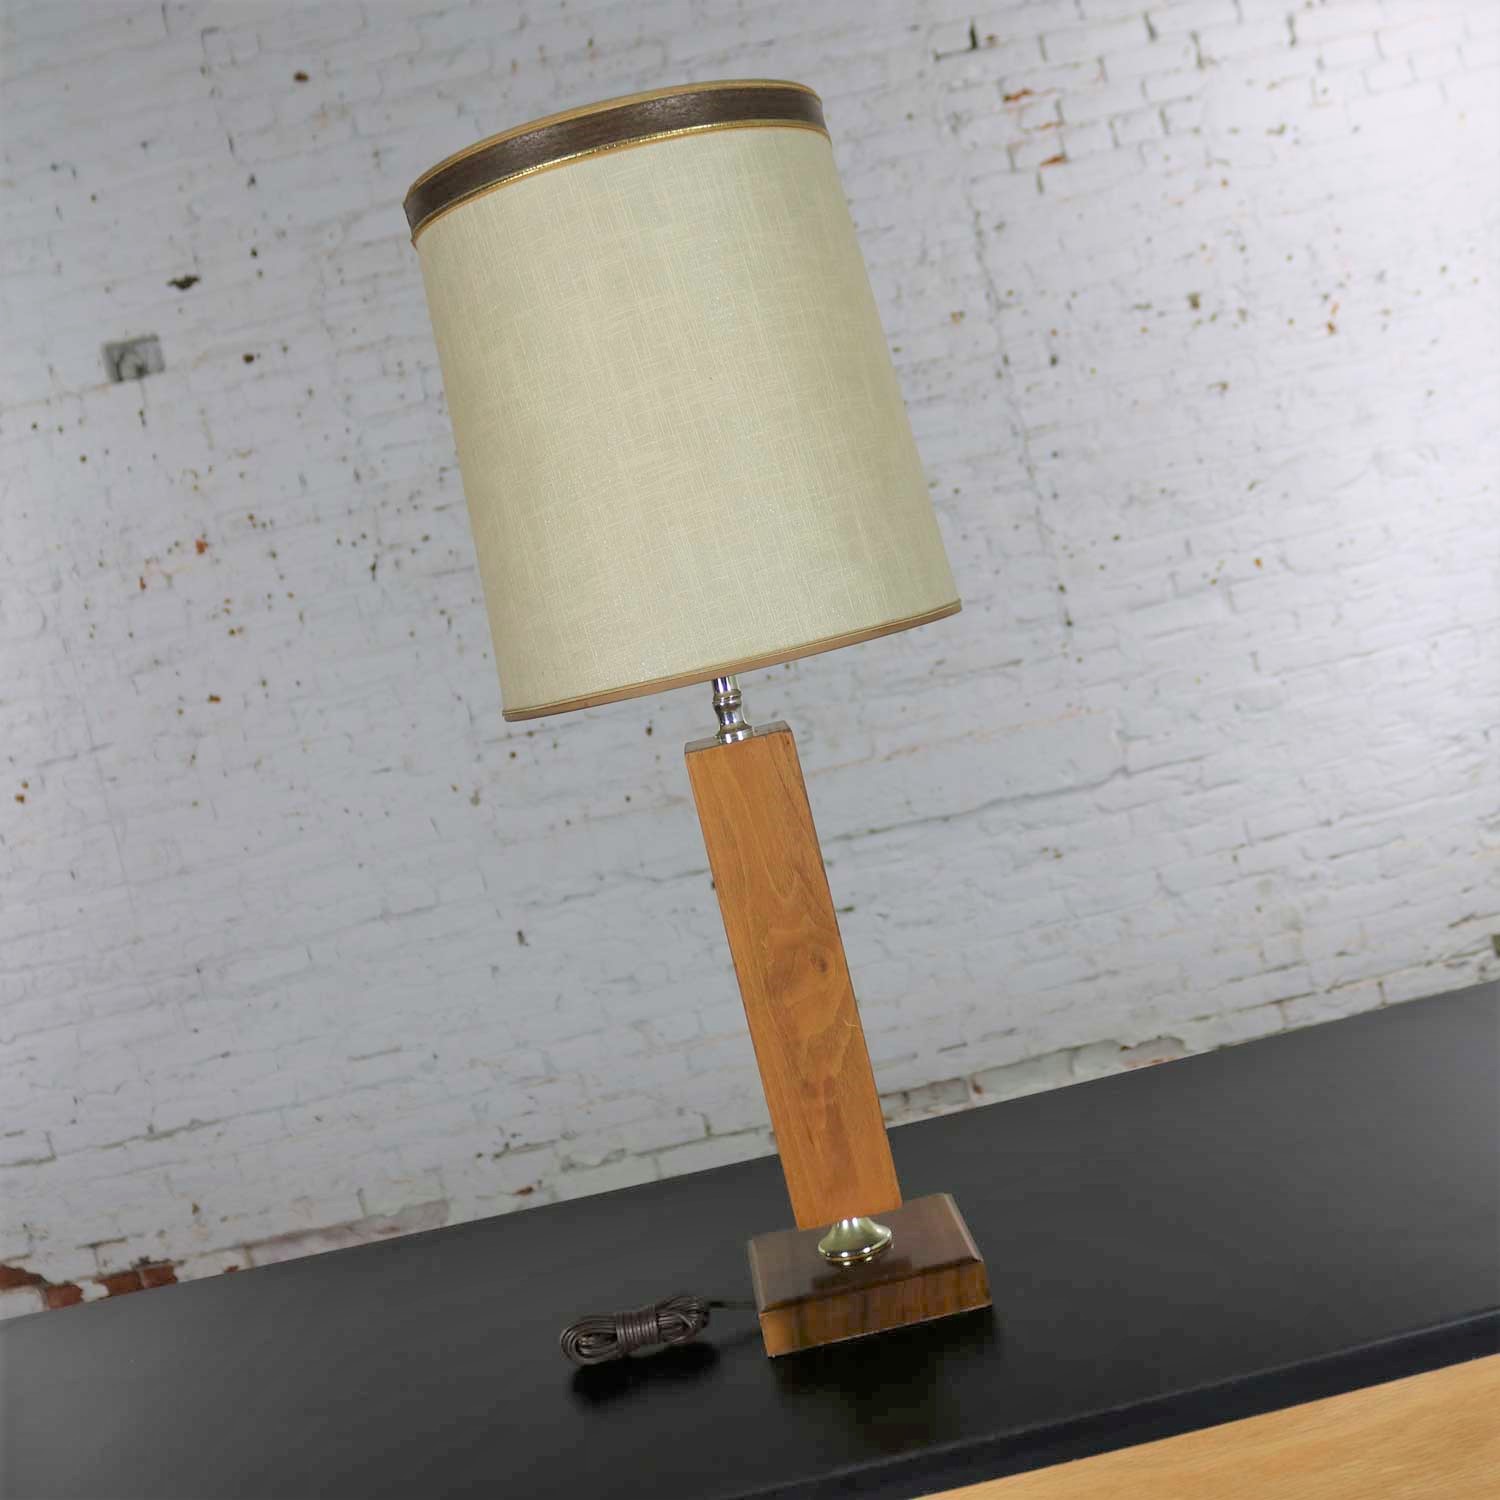 Small Scale Mid Century Modern Walnut and Brass Lamp Style of Laurel Lamp Mfg. Co.